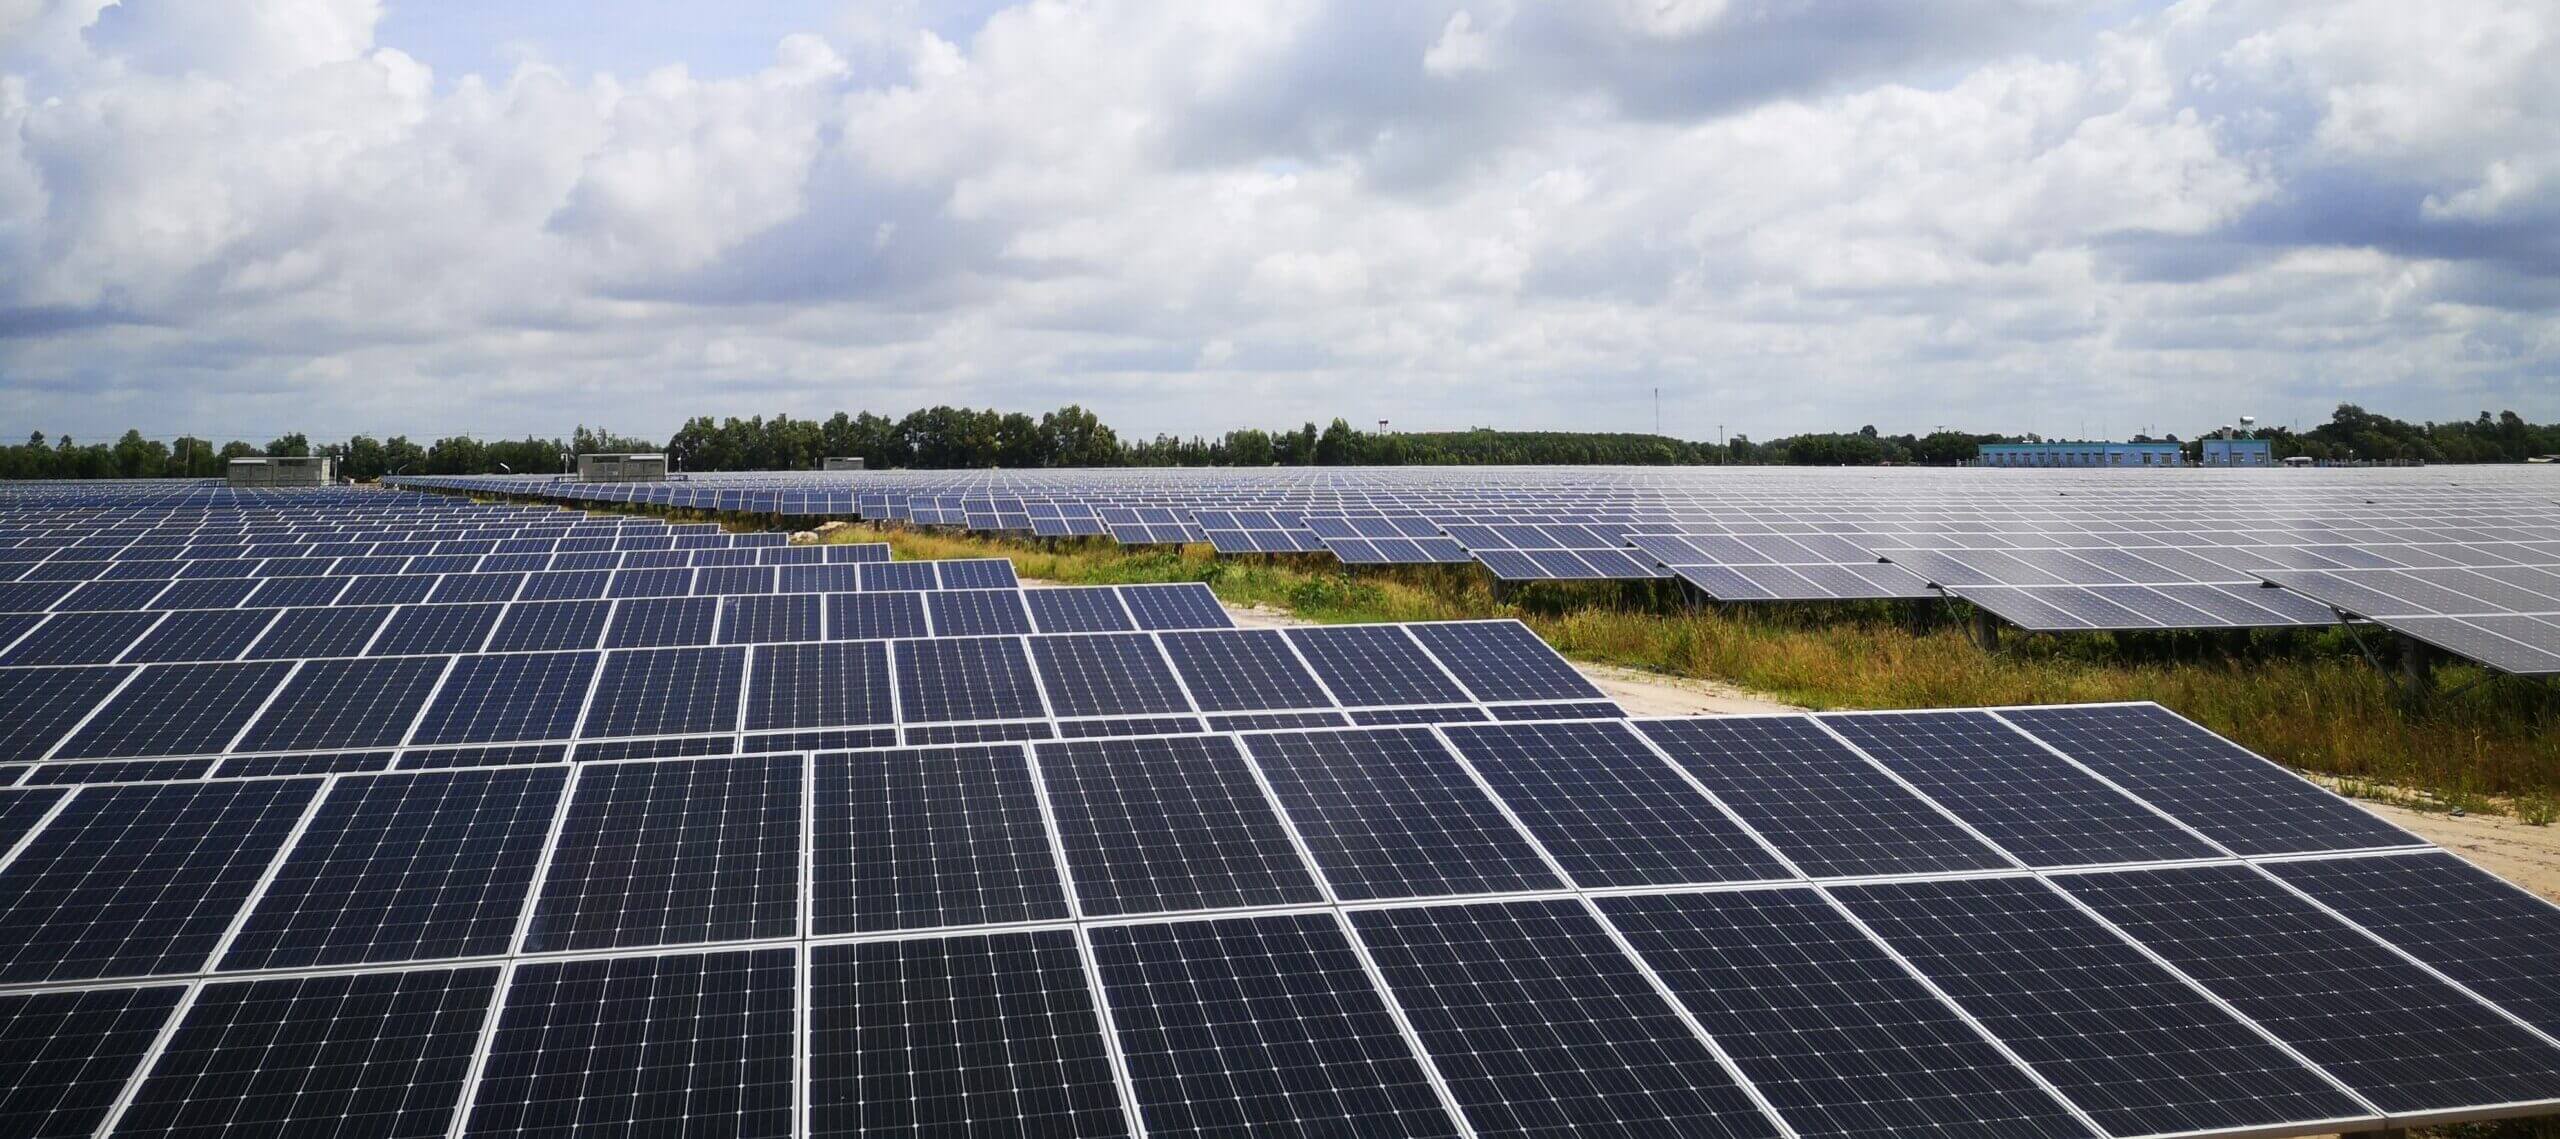 Field of solar panels with PV modules